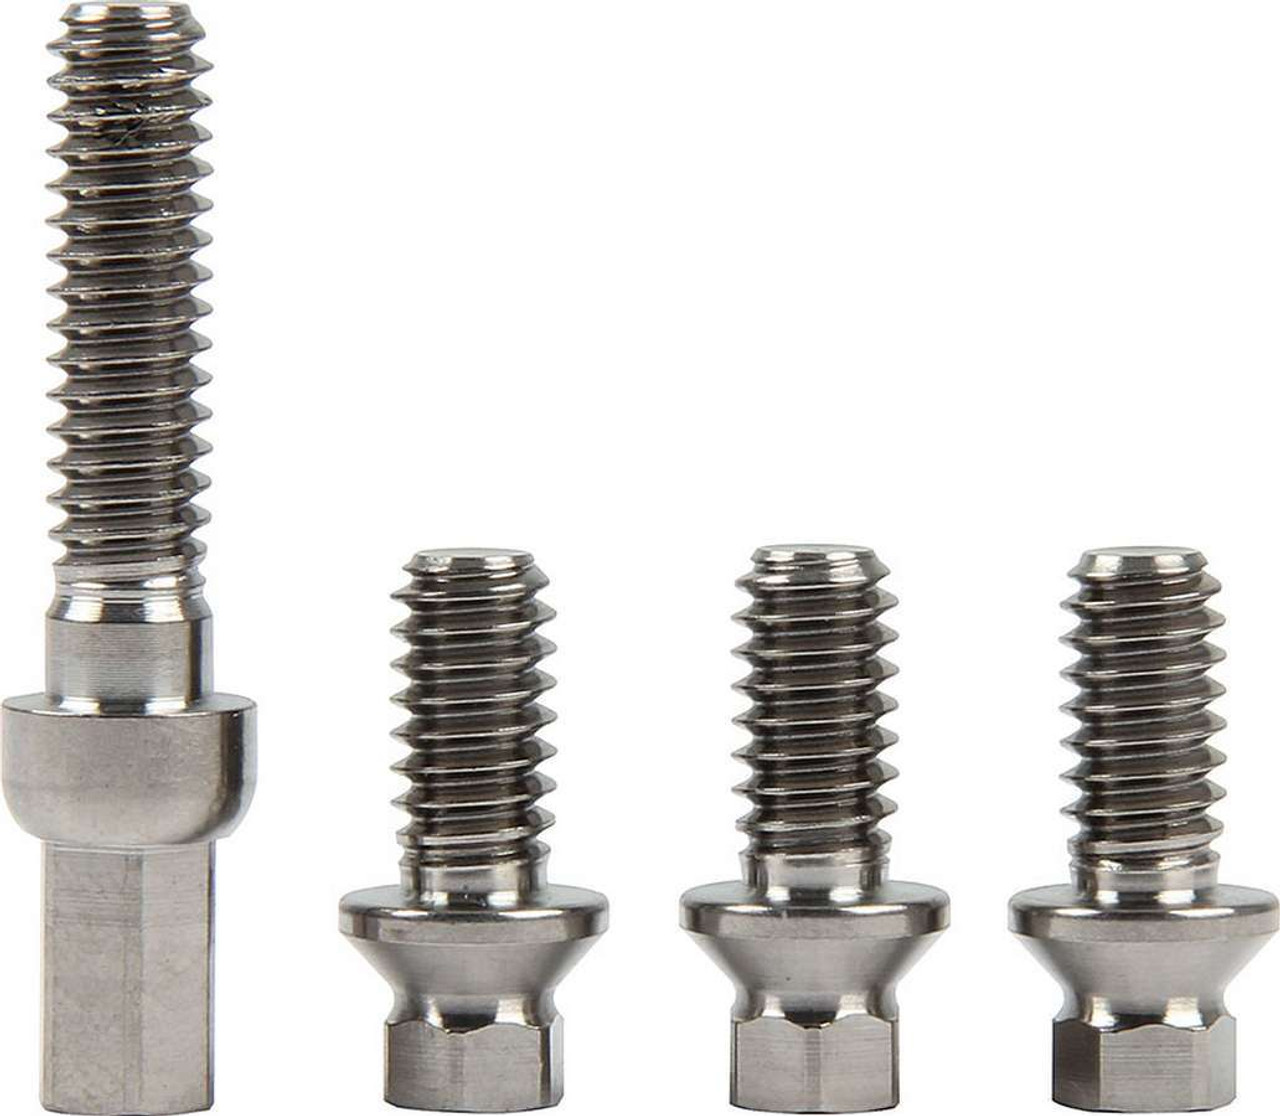 Includes: 1) 1/4-20 x 1 Pinch Bolt 3) 1/4-20 x 1/2 Adapter Bolts